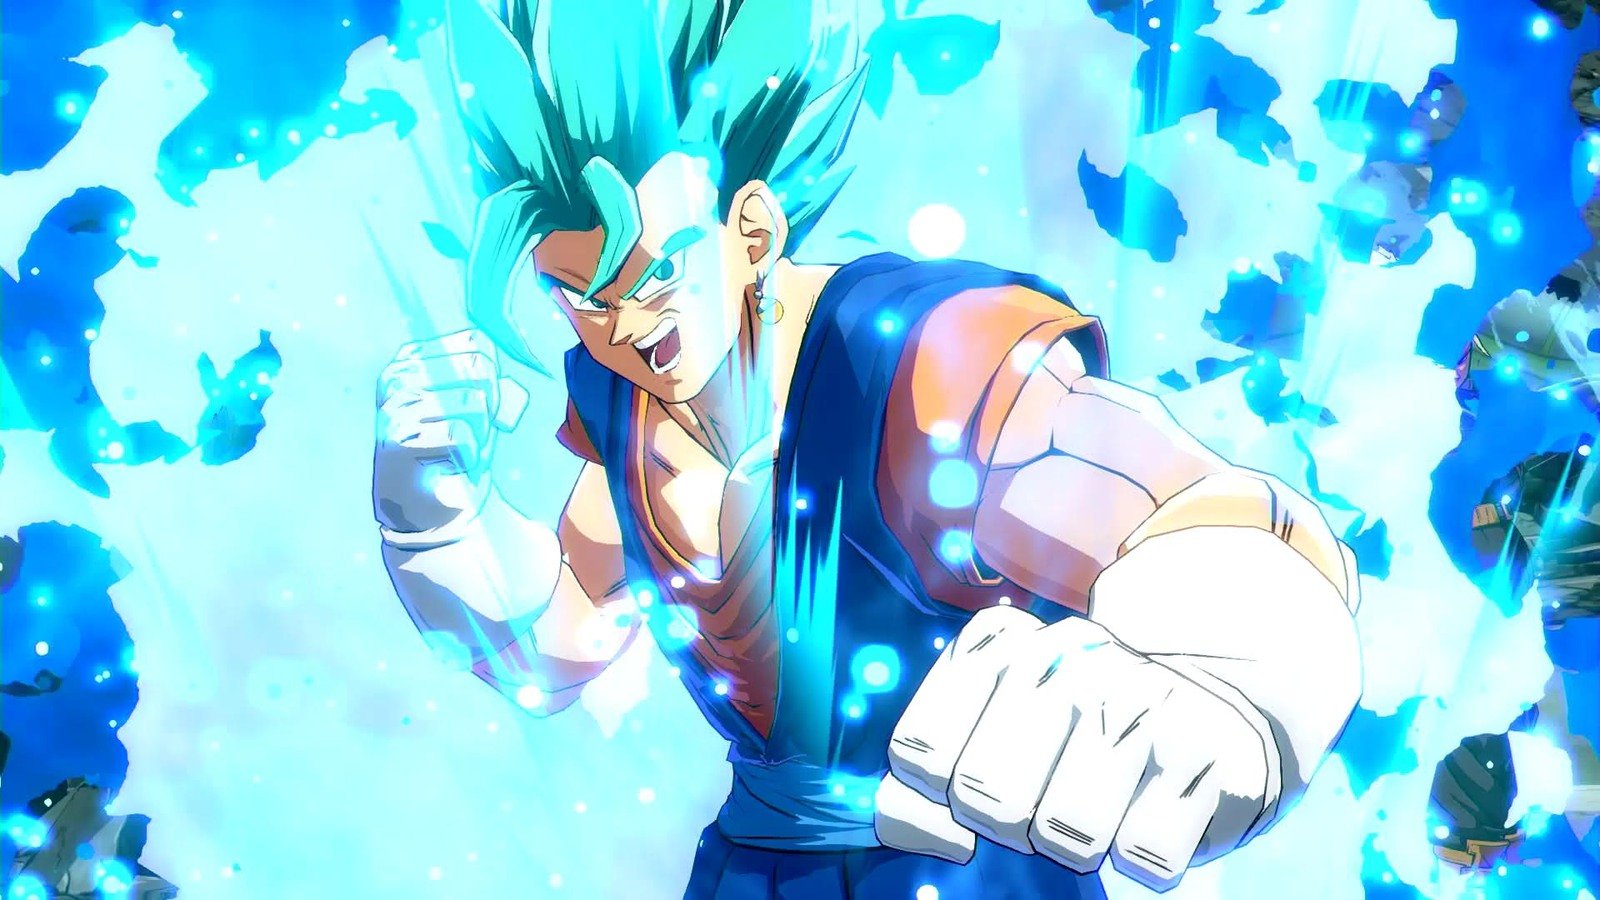 Dragon Ball game featured